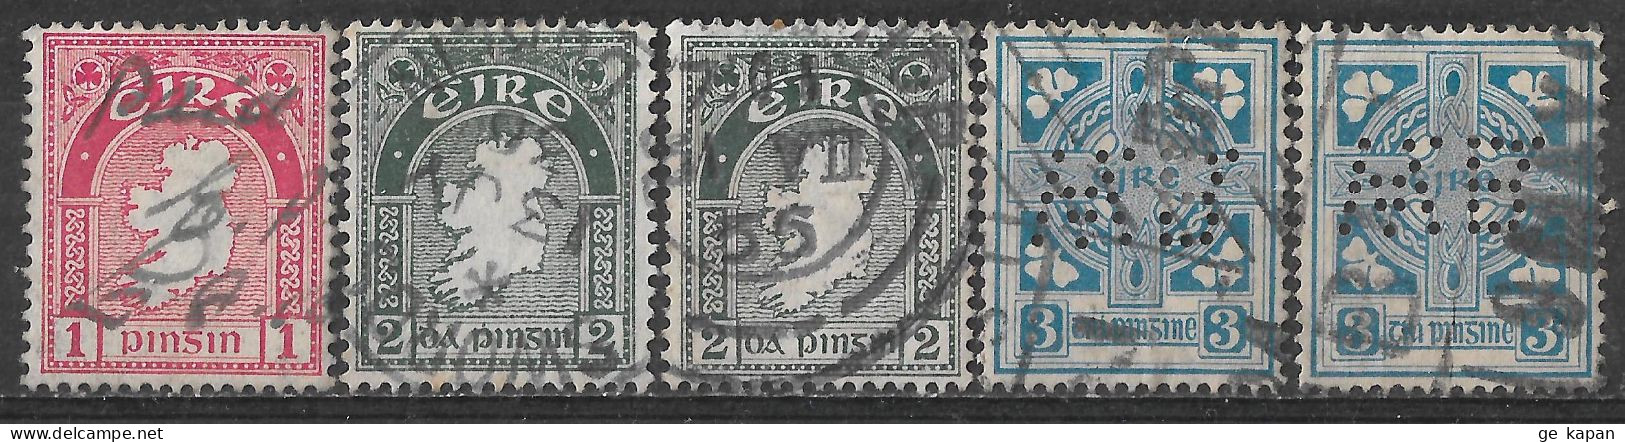 1922-1923 IRELAND SET OF 5 USED STAMPS (Michel # 41A,43A,45A) CV €5.30 - Usati